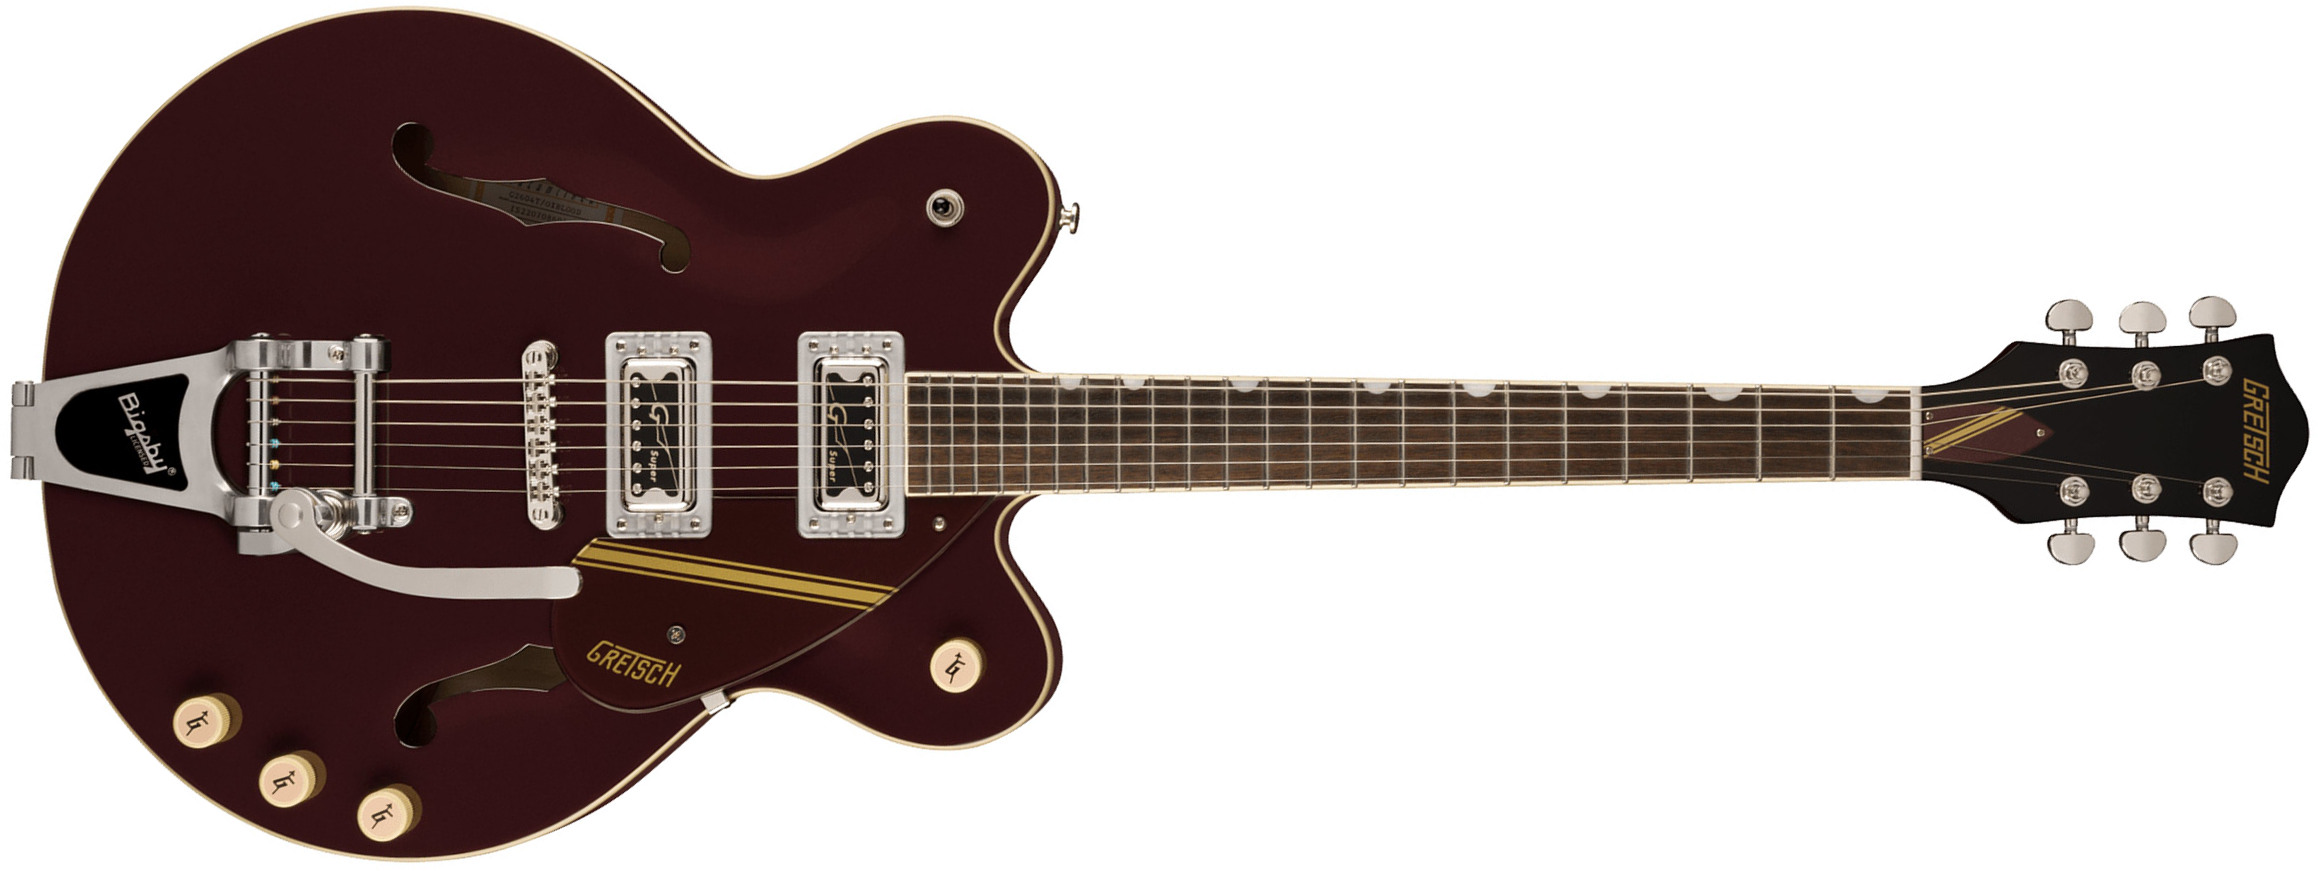 Gretsch G2604t Streamliner Rally Ii Center Block Dc Bigsby 2h Trem Lau - 2-tone Oxblood/walnut Stain - Guitare Électrique 1/2 Caisse - Main picture